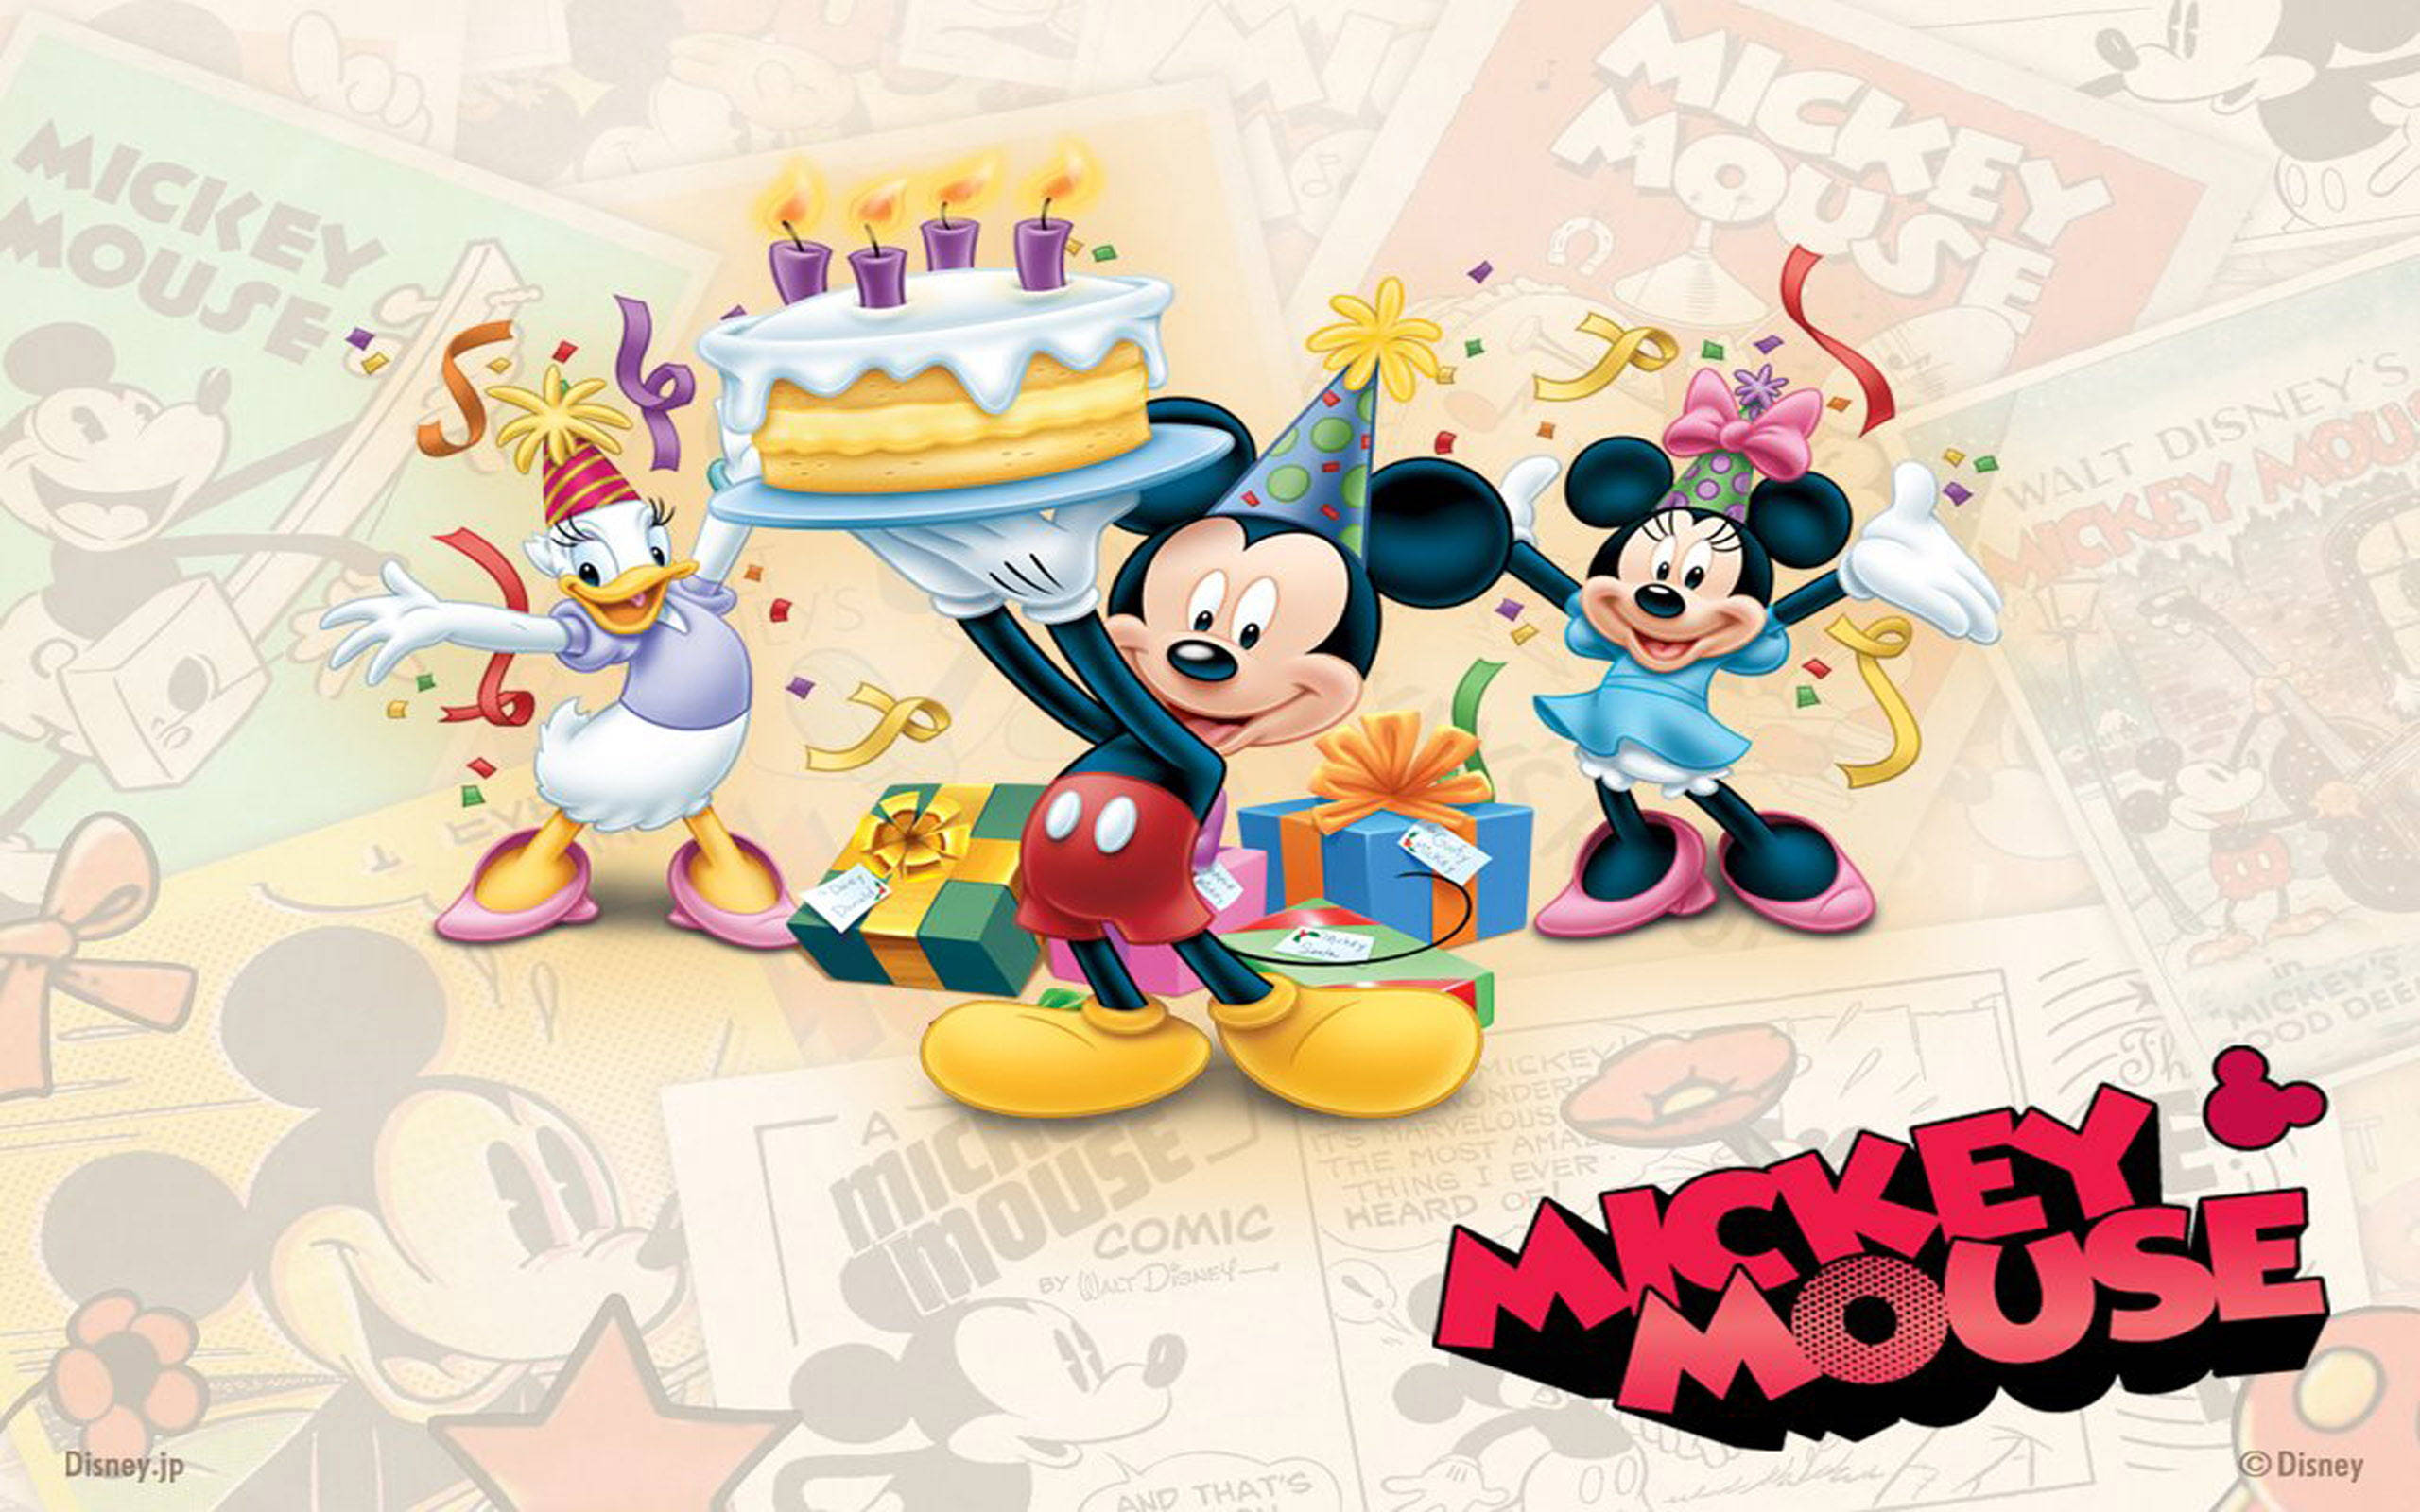 Celebrate With Style - Delicious Mickey Mouse Themed Birthday Cake